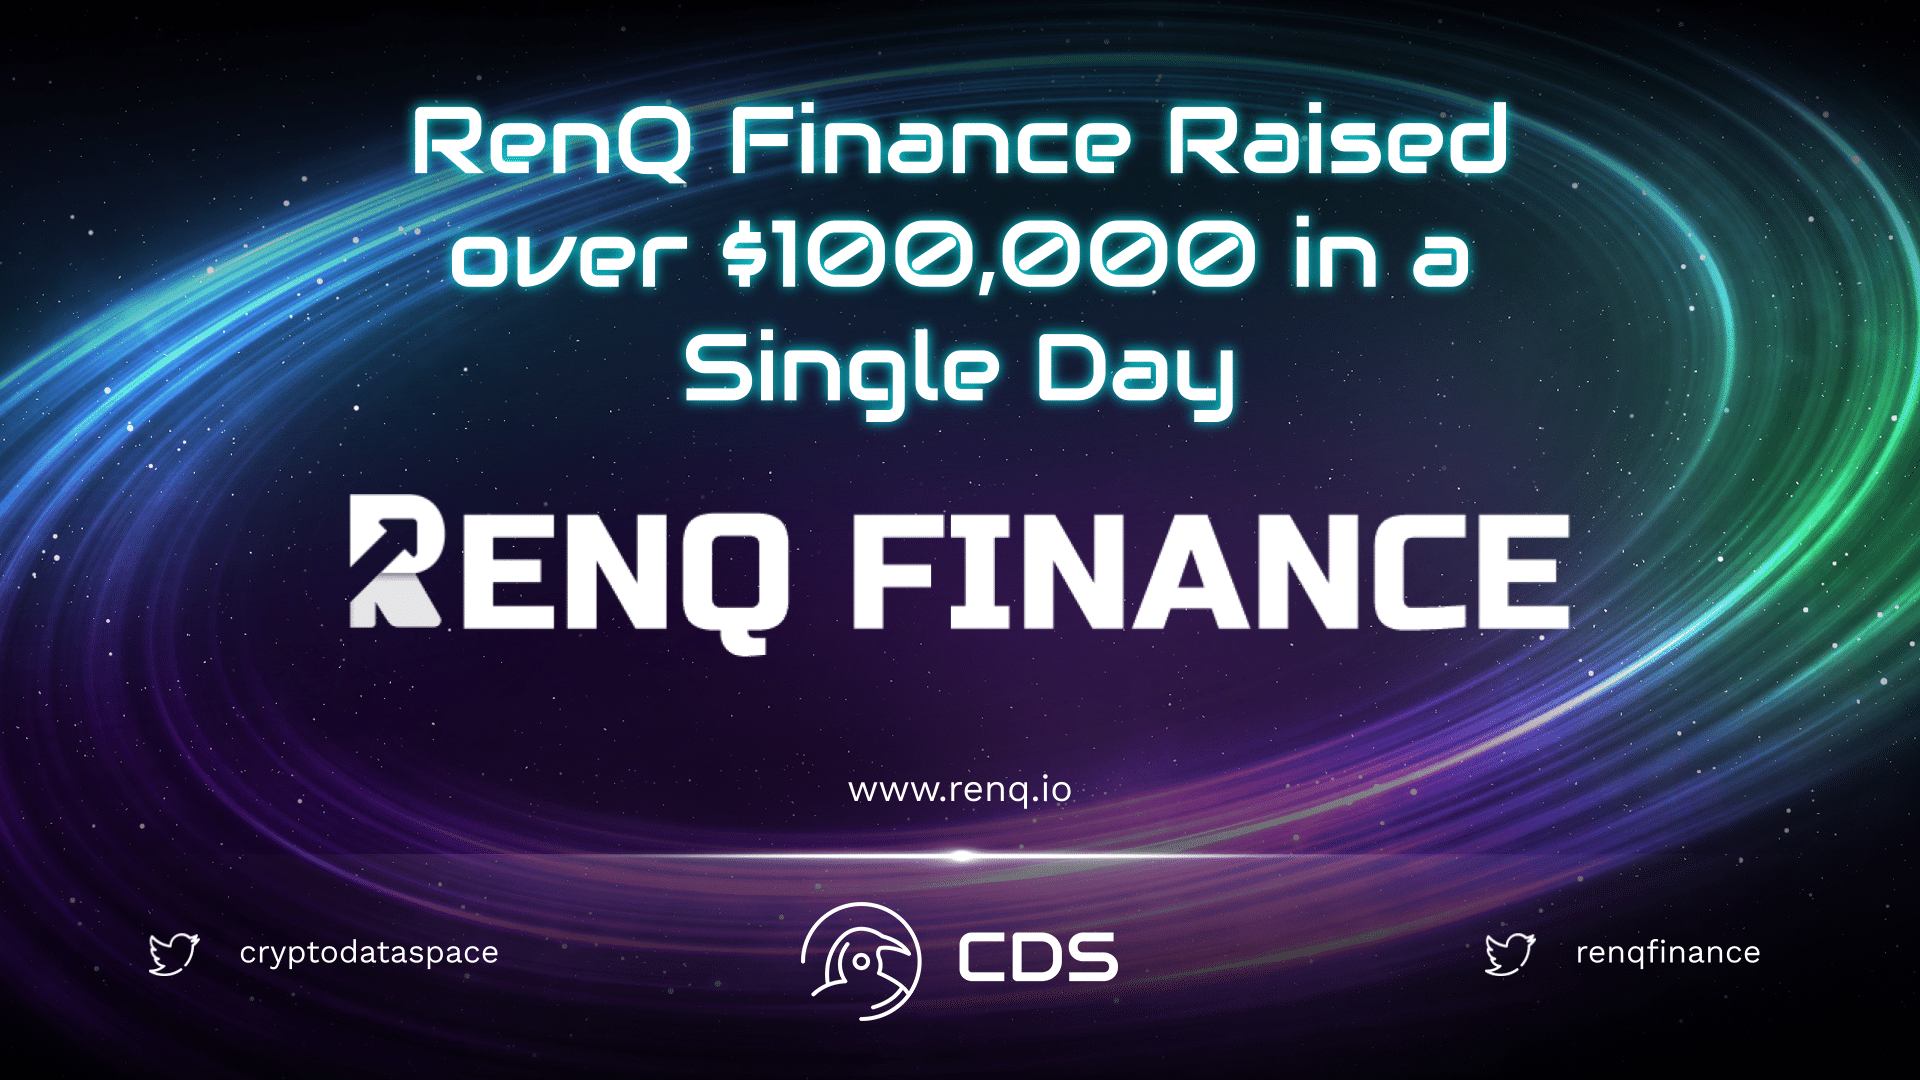 RenQ Finance Raised over $100,000 in a Single Day